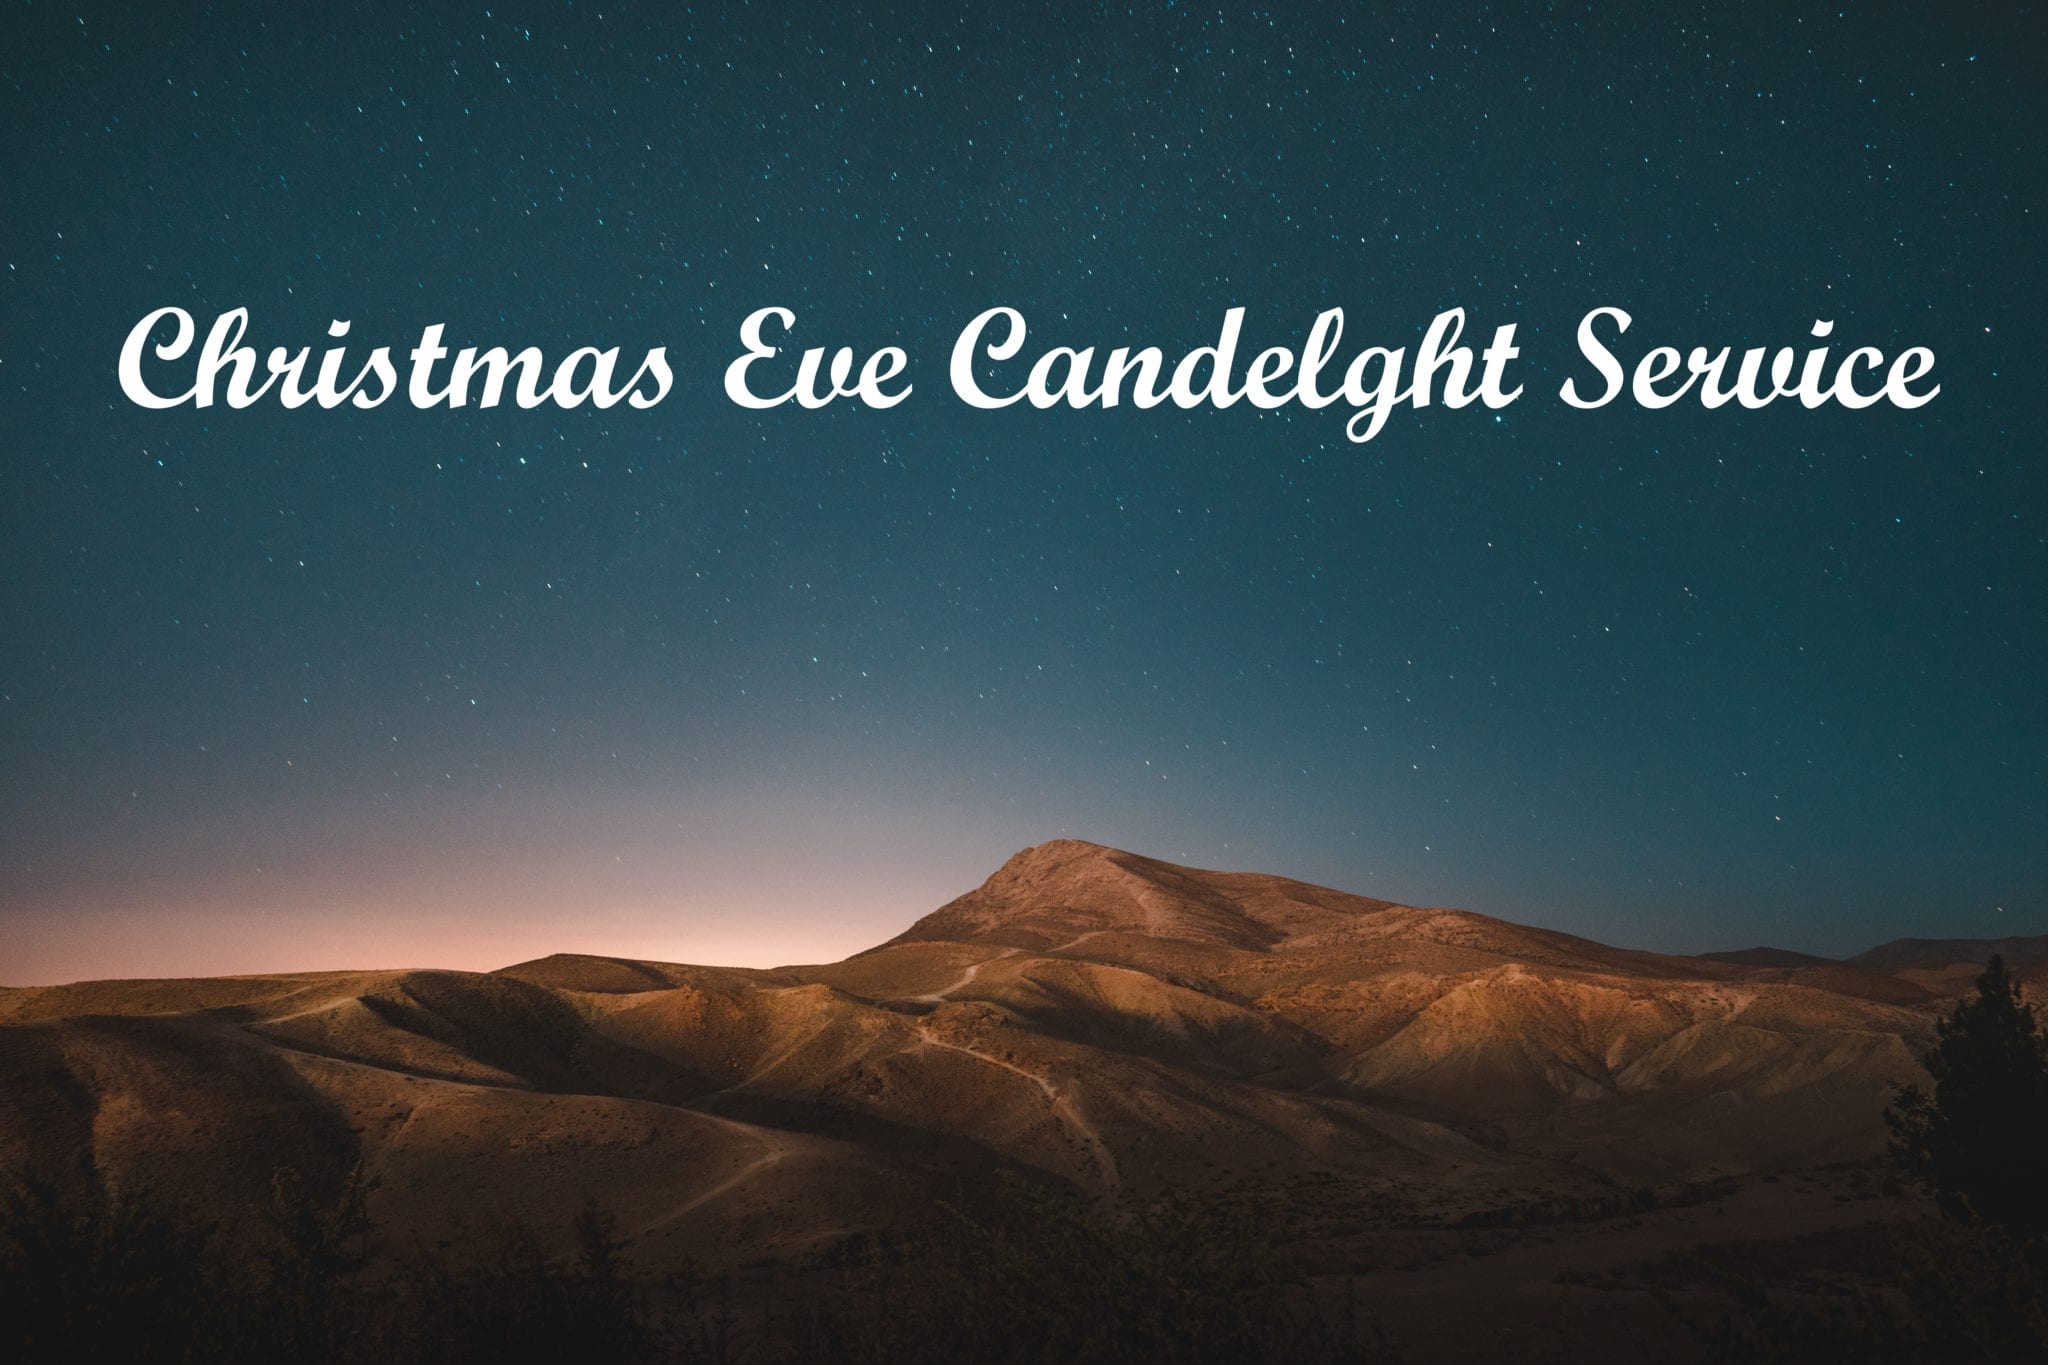 Christmas Eve Candlelight Service Monday, December 24th at 7:00 PM